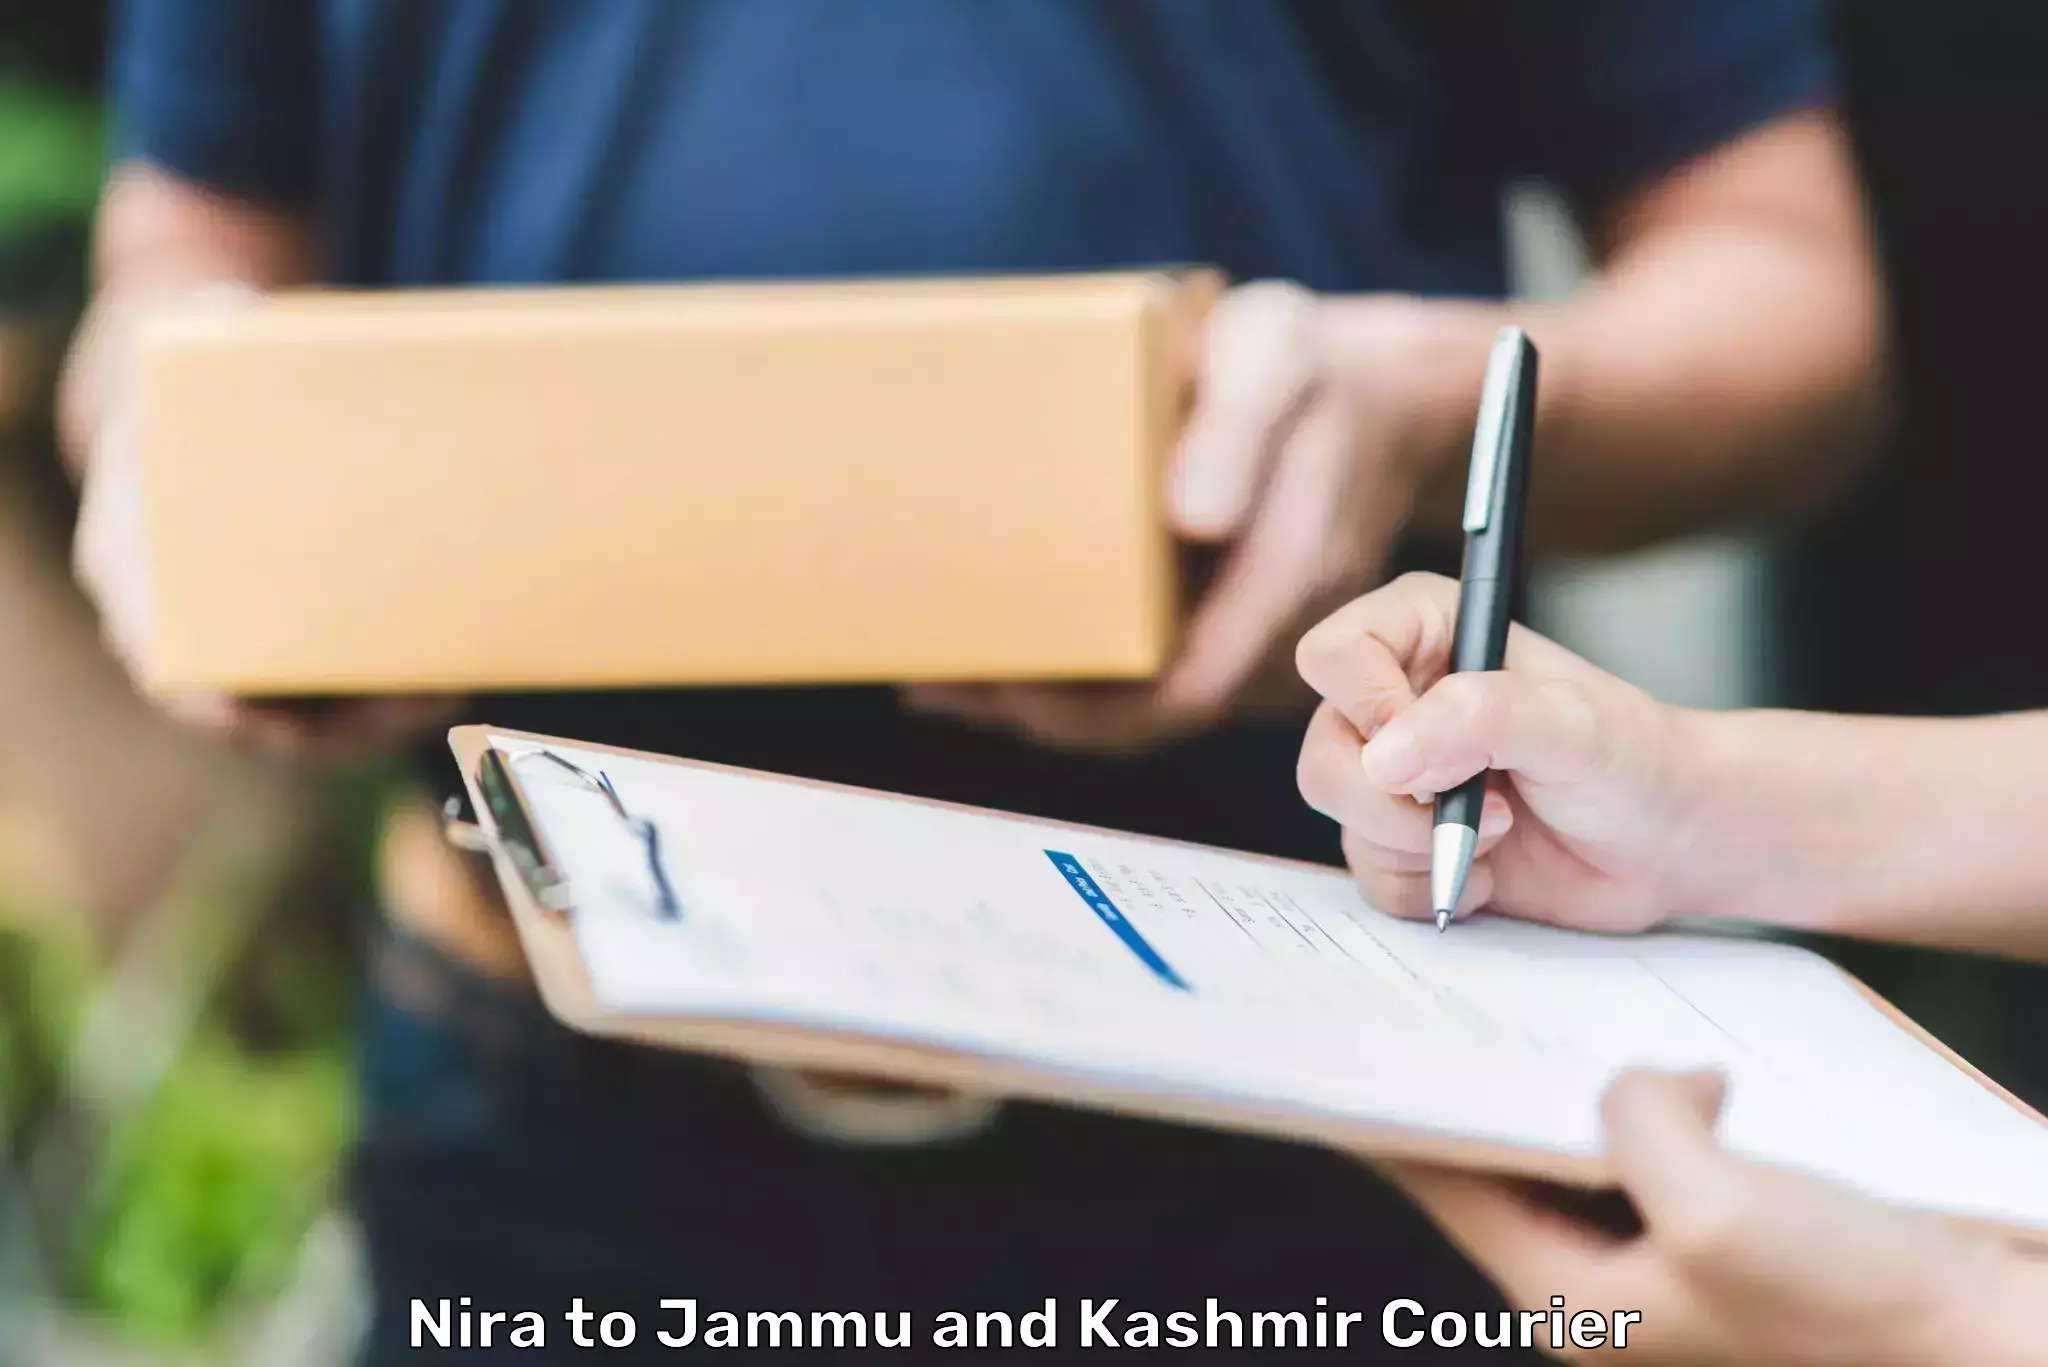 Automated parcel services Nira to Baramulla